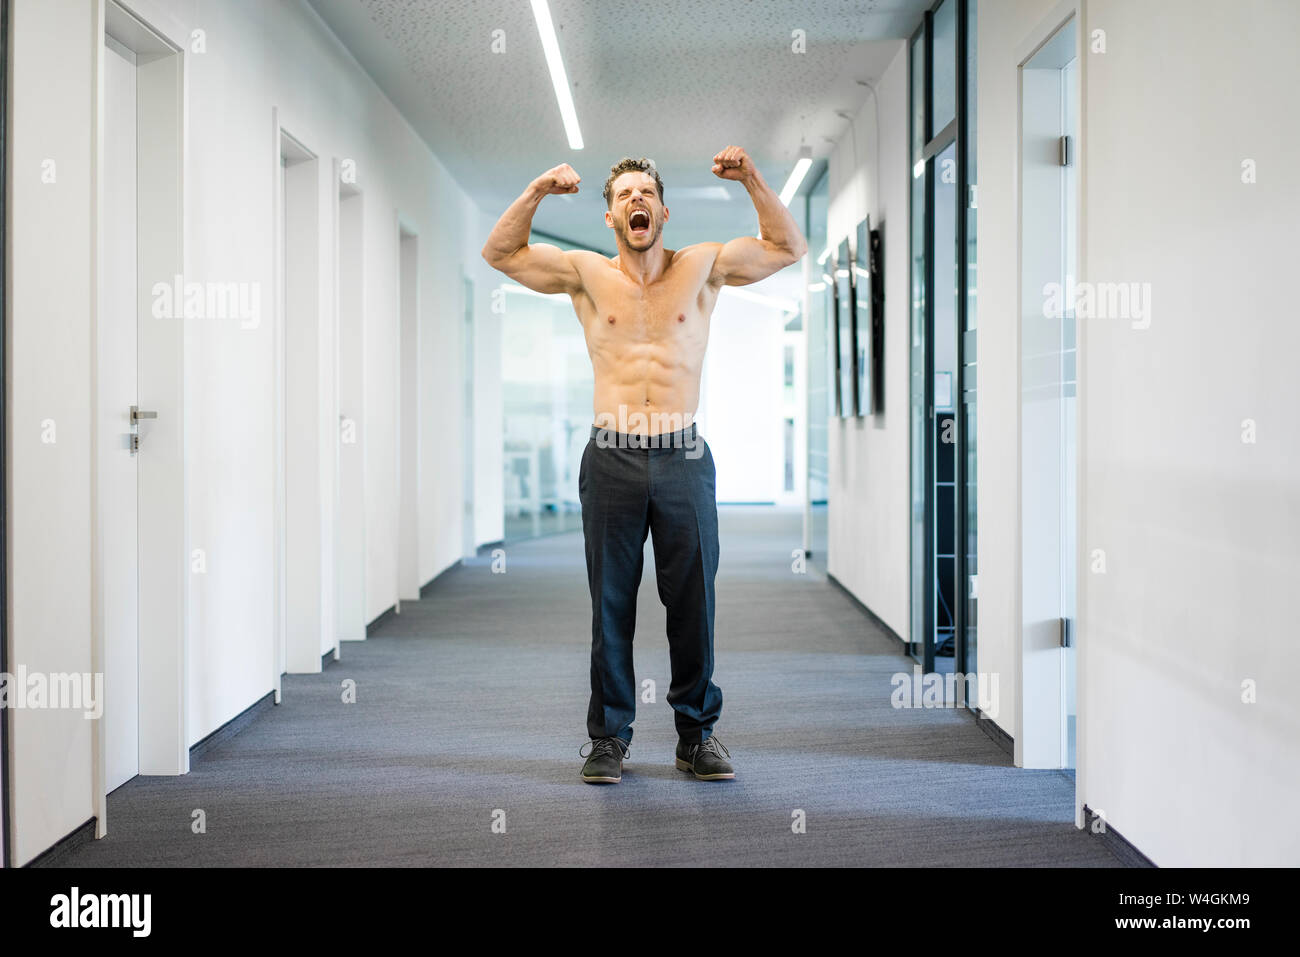 Screaming barechested businessman flexing muscles in office Stock Photo